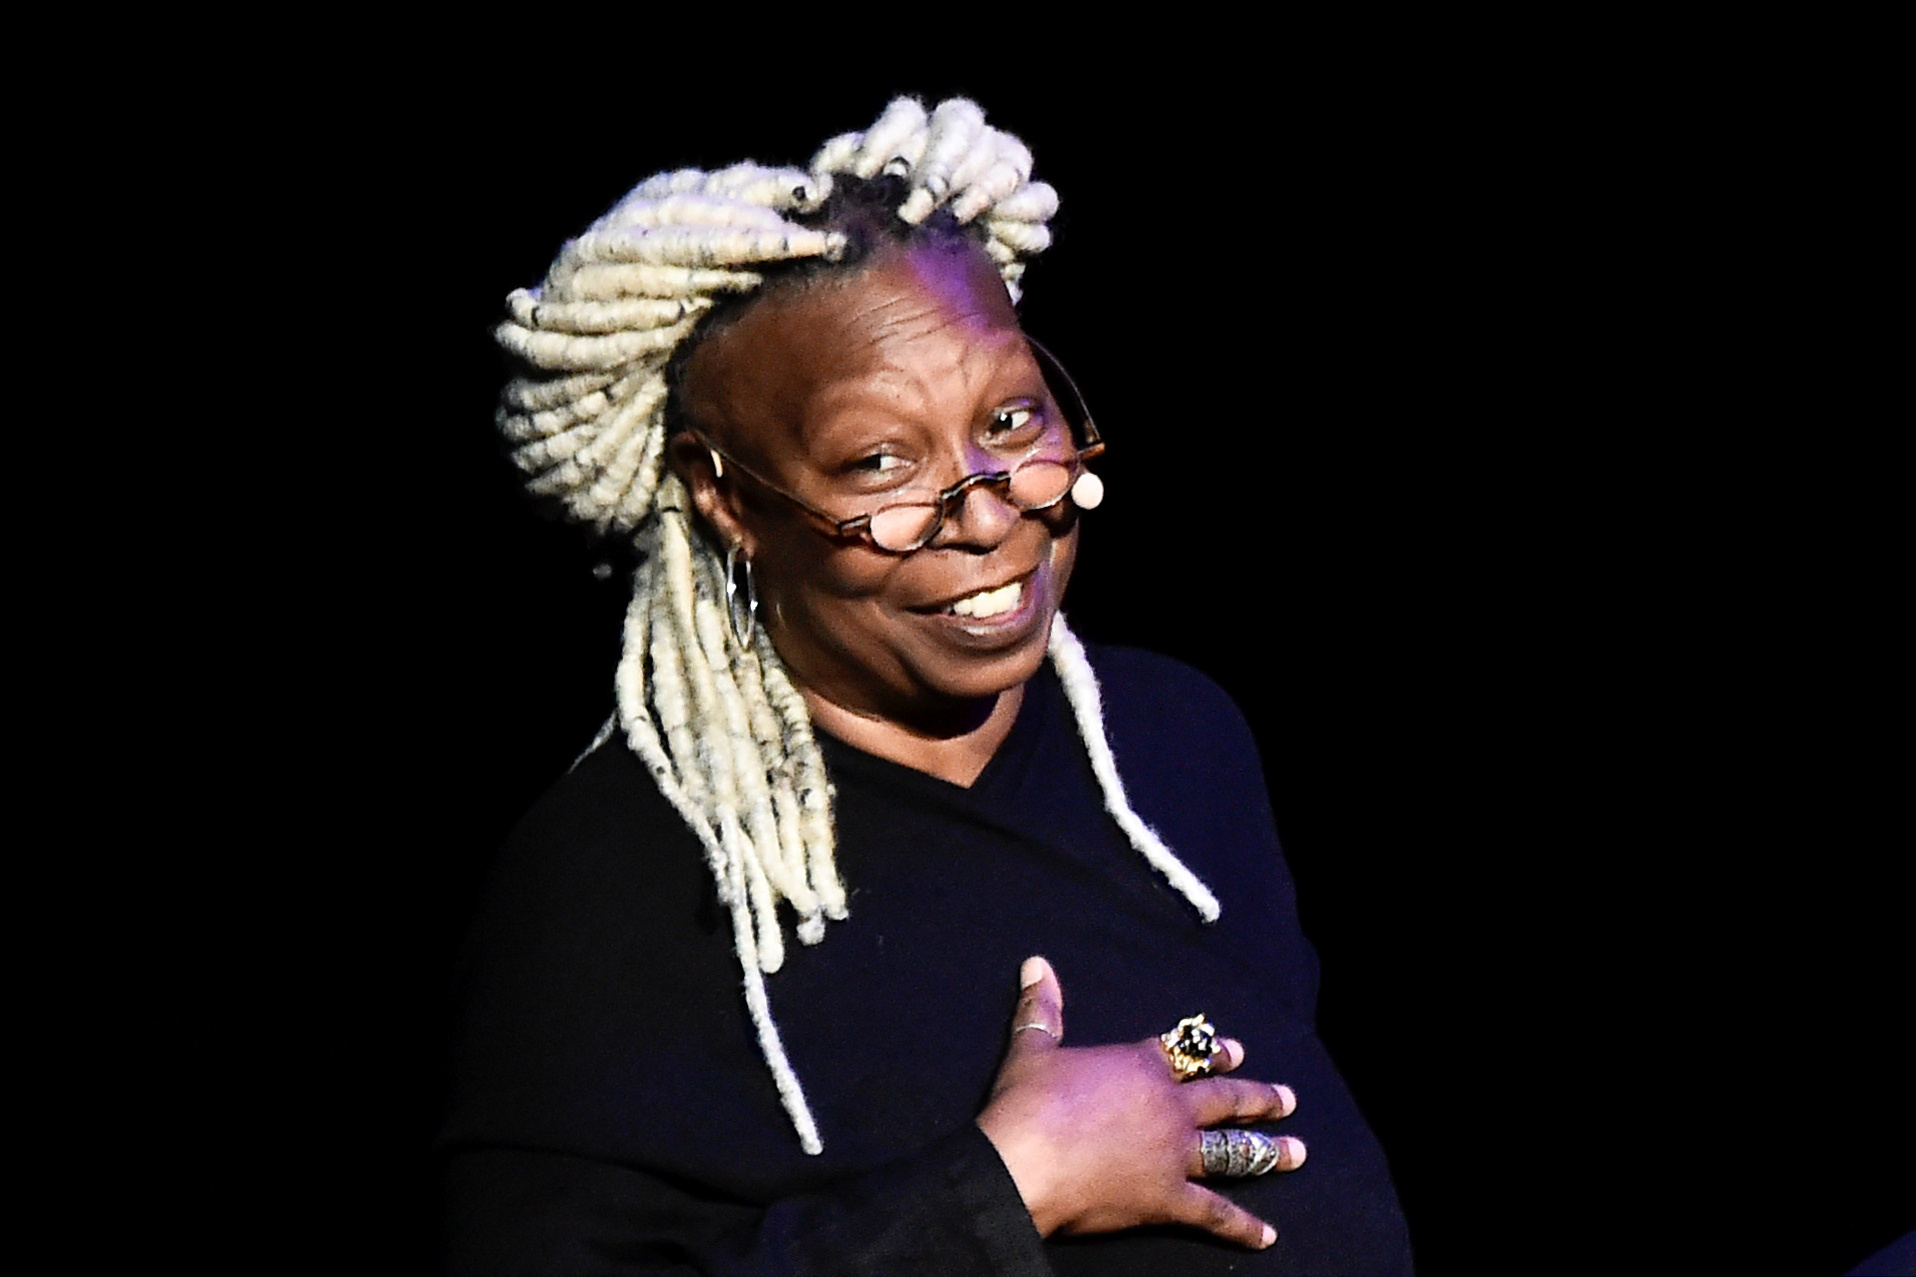 Actor Whoopi Goldberg during the presentation of the "Looking for Juliet" 2020 Pirelli Calendar in the northern Italian city of Verona, Italy, December 3, 2019. Picture taken December 3, 2019. REUTERS/Flavio Lo Scalzo